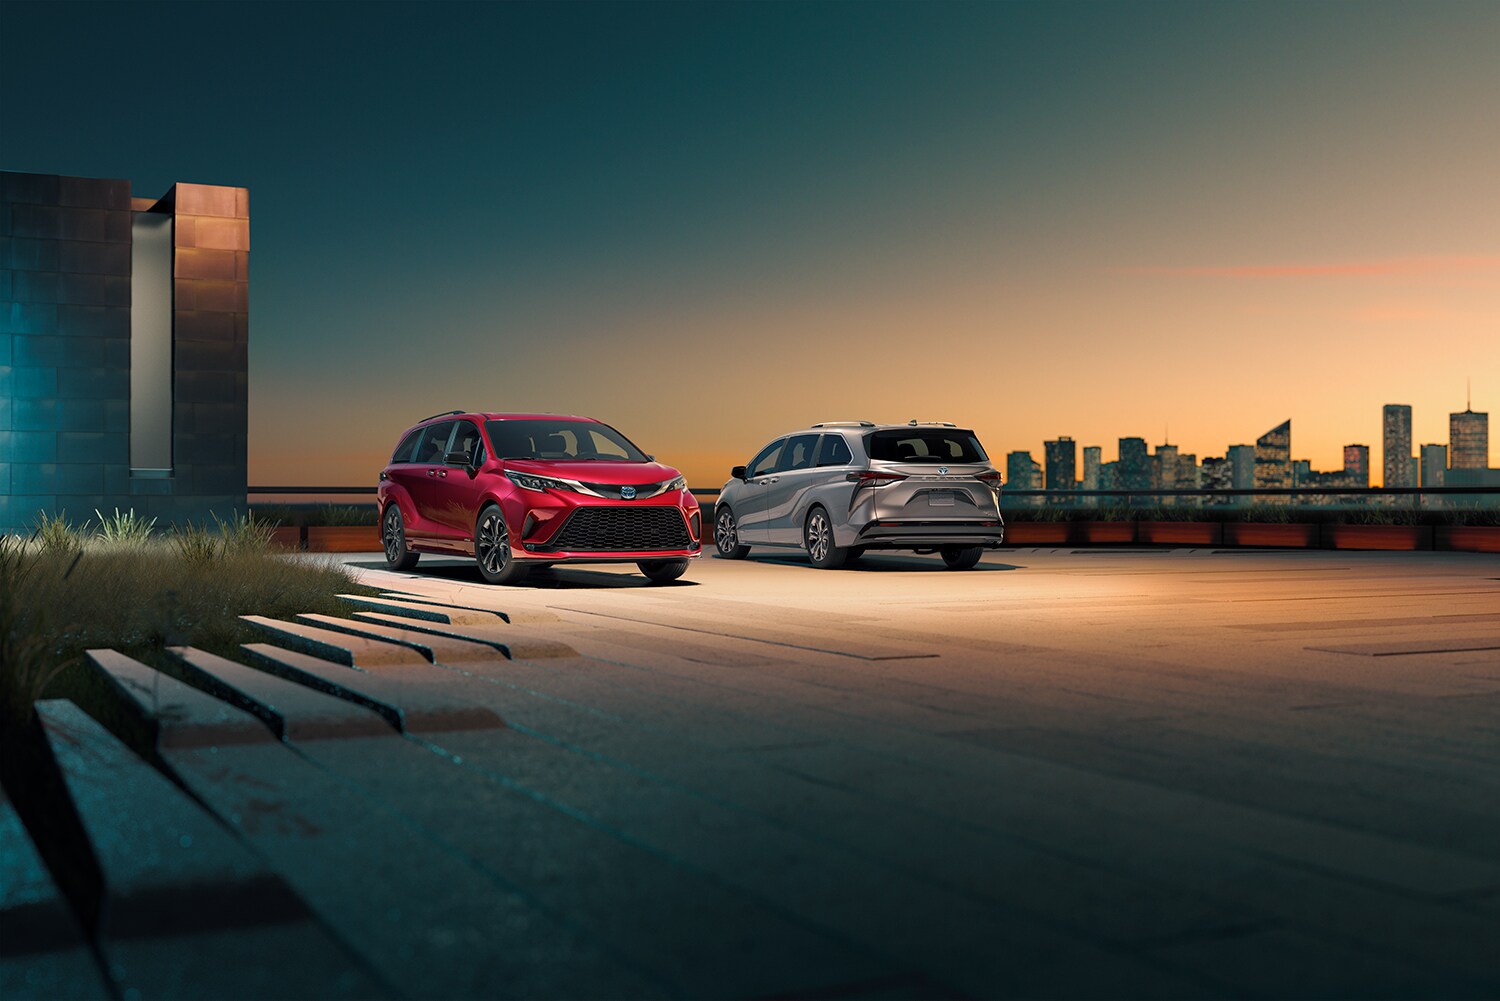 Toyota Hybrid for Everyone at Bobby Rahal Toyota | Two 2022 Toyota Sienna Hybrids parked at night